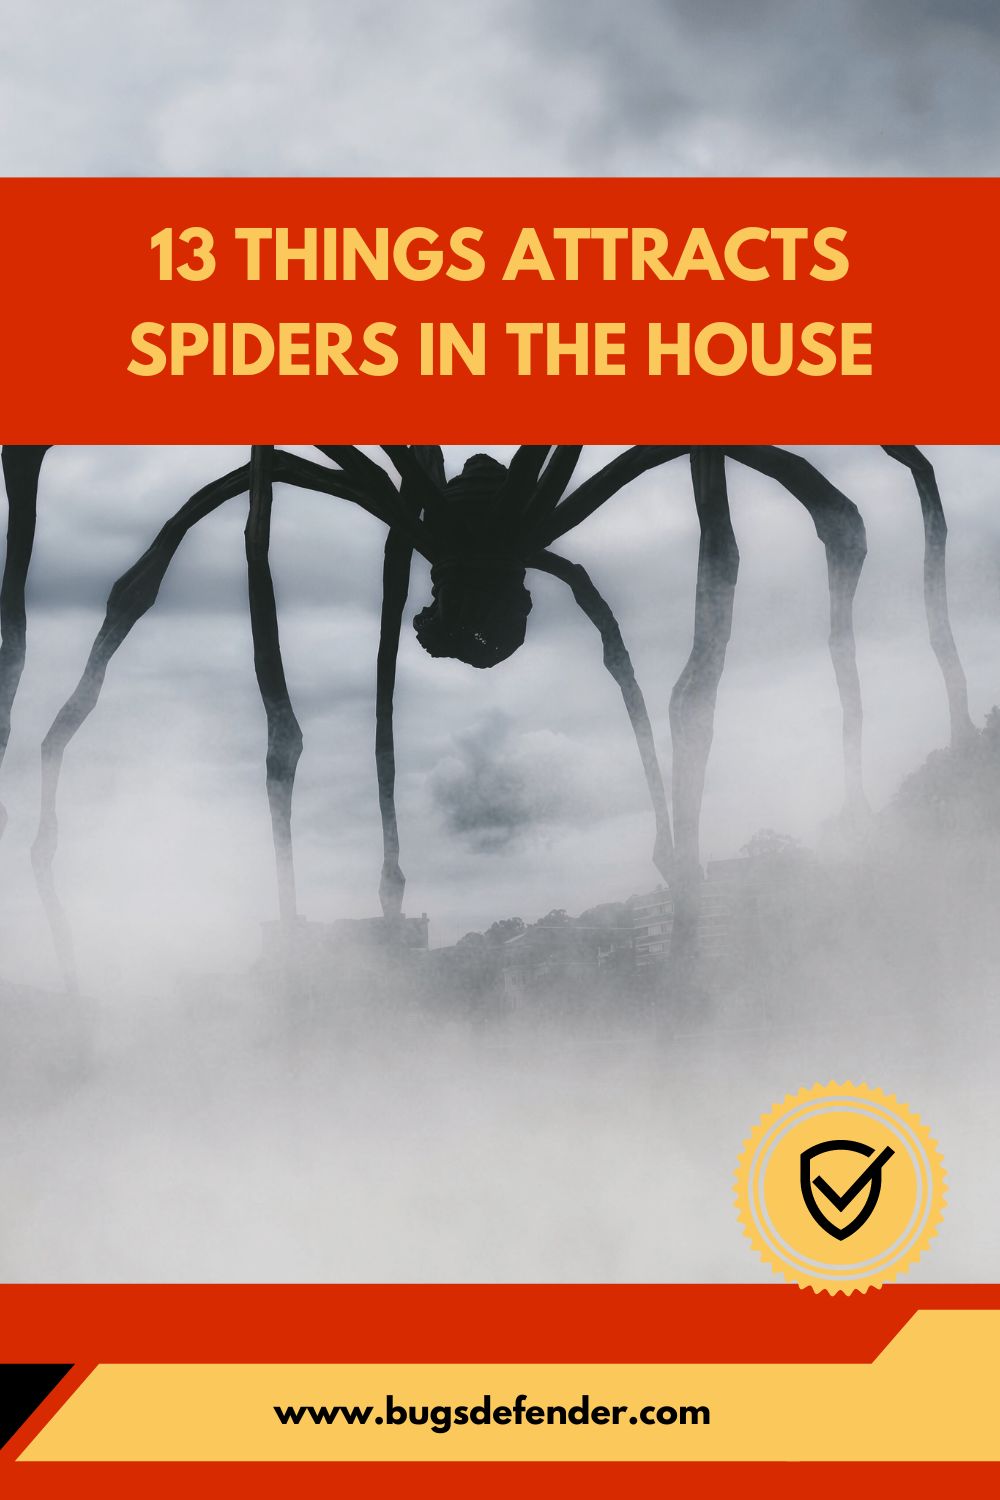 13 Things Attracts Spiders in the House pin 1